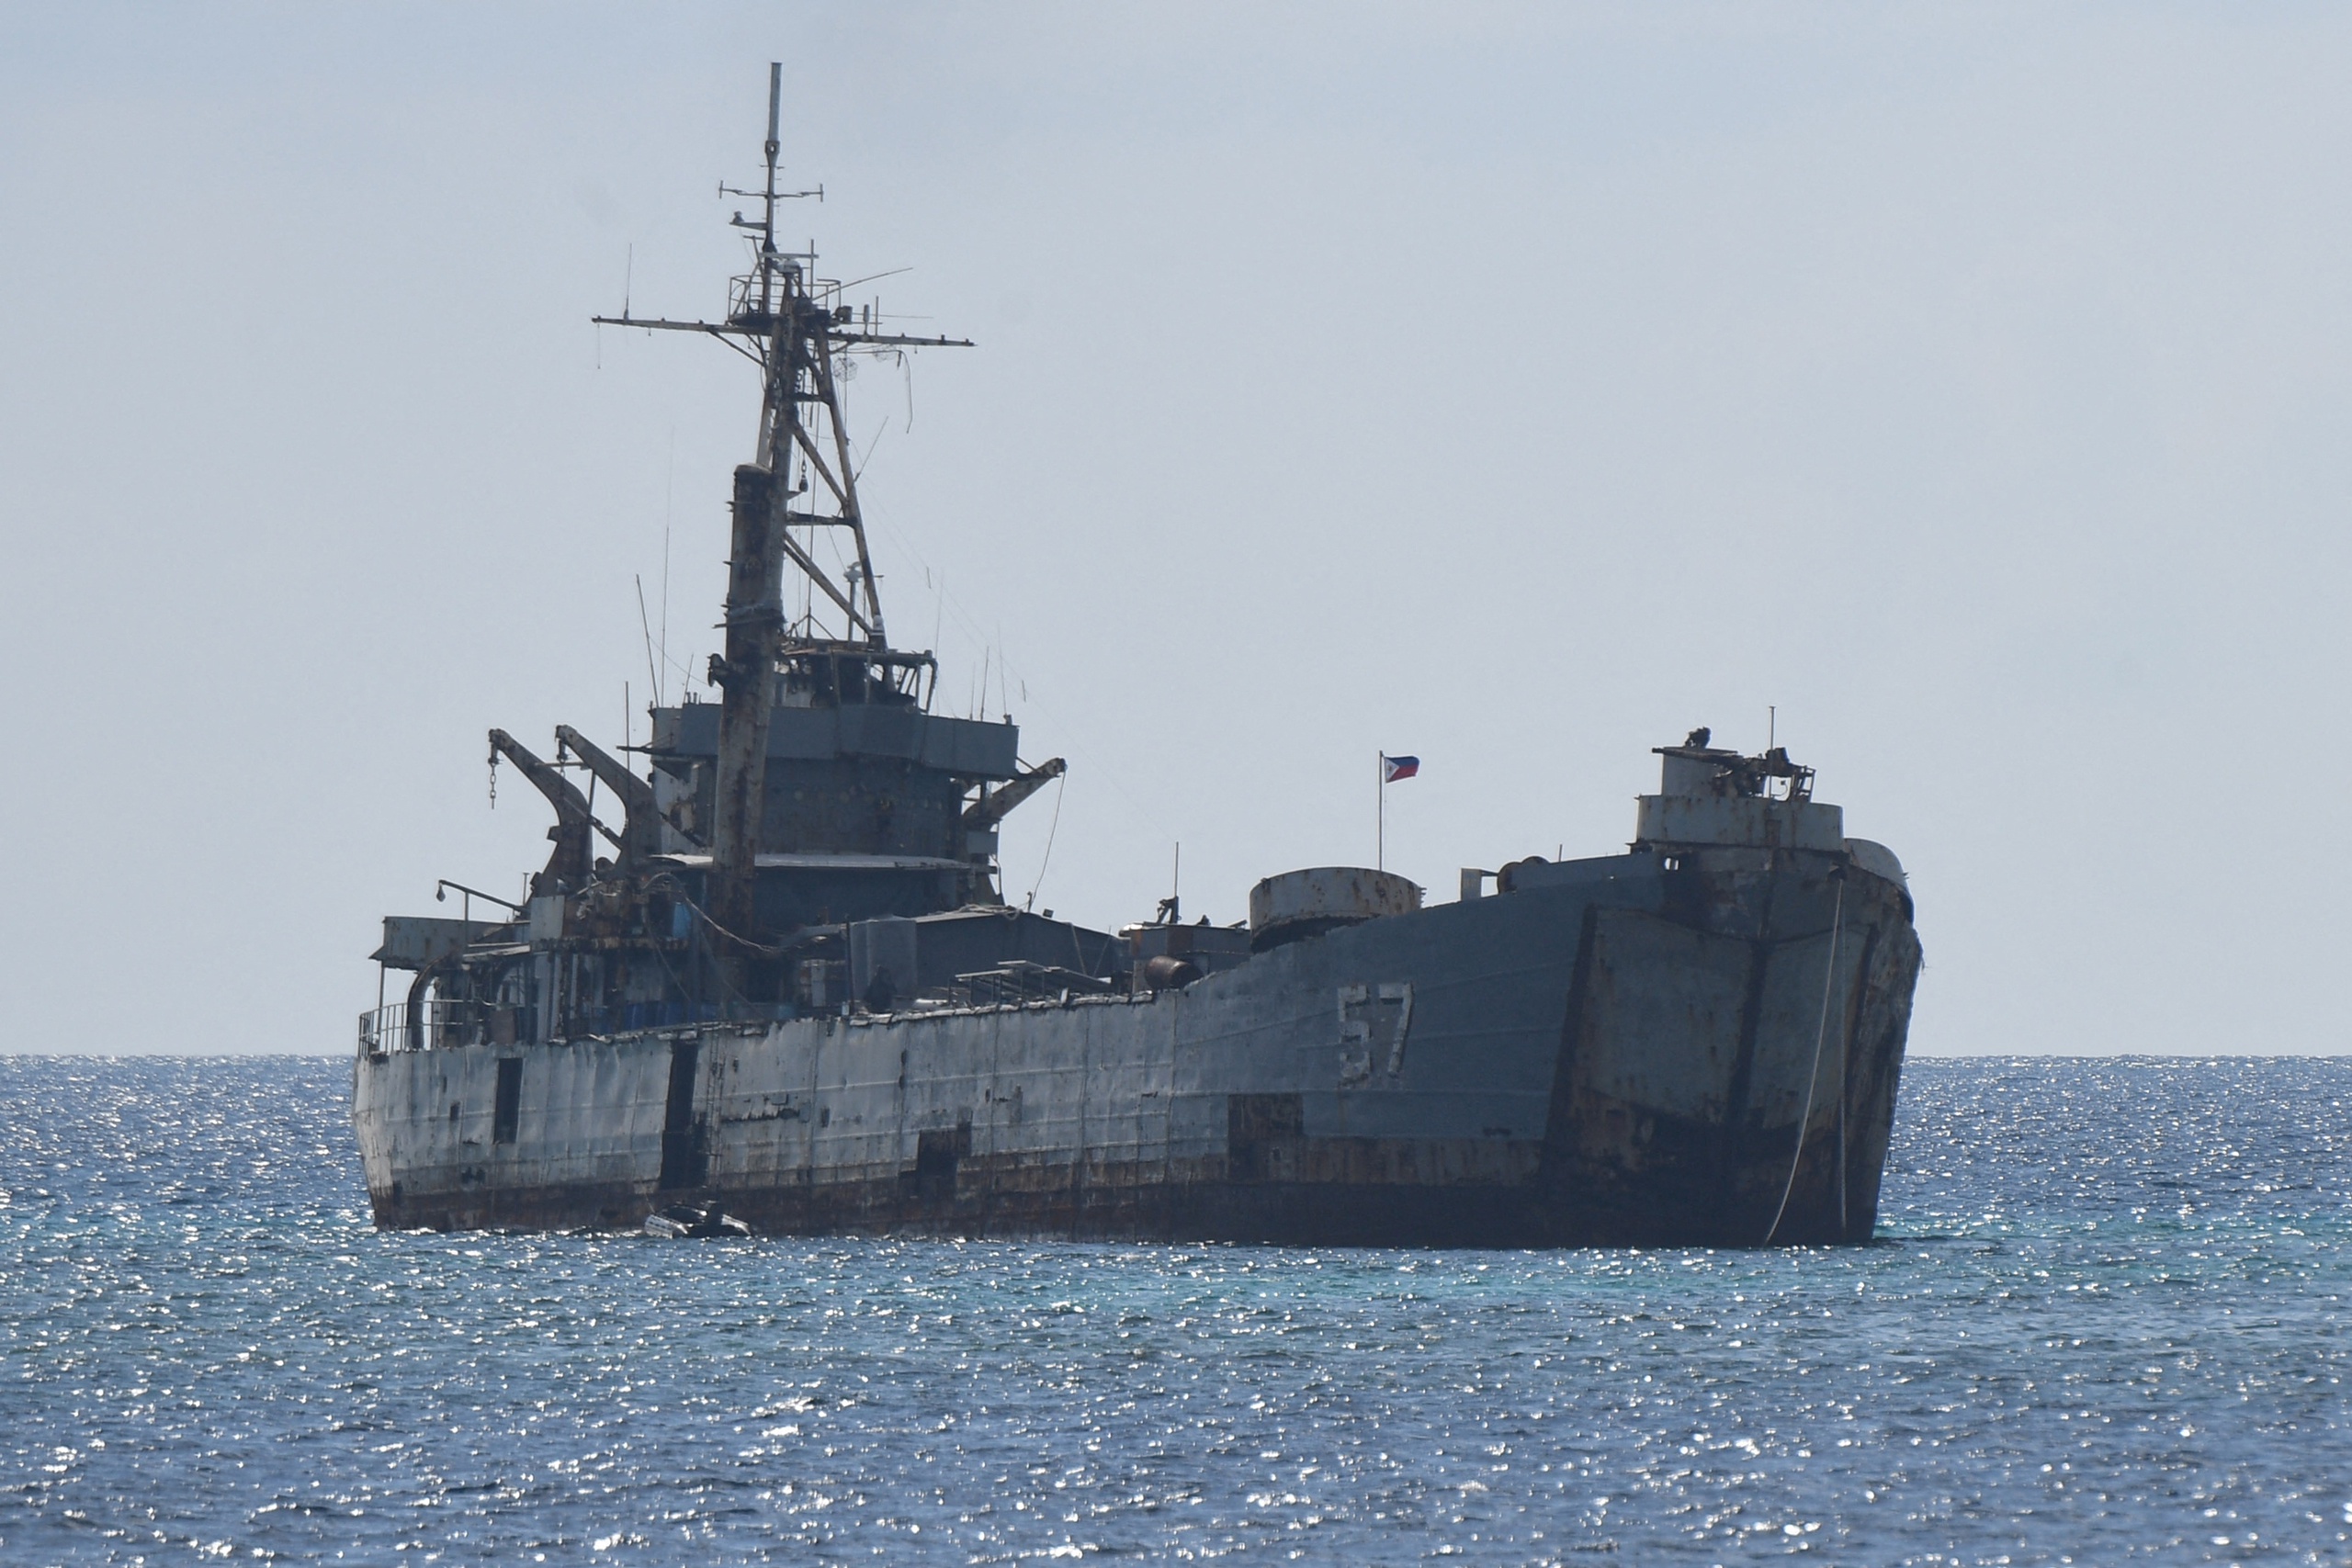 The Philippine Navy ship BRP Sierra Madre was deployed by marines to assert Manila's territorial claims at the Second Thomas Shoal in the Spratly Islands in the disputed South China Sea. 